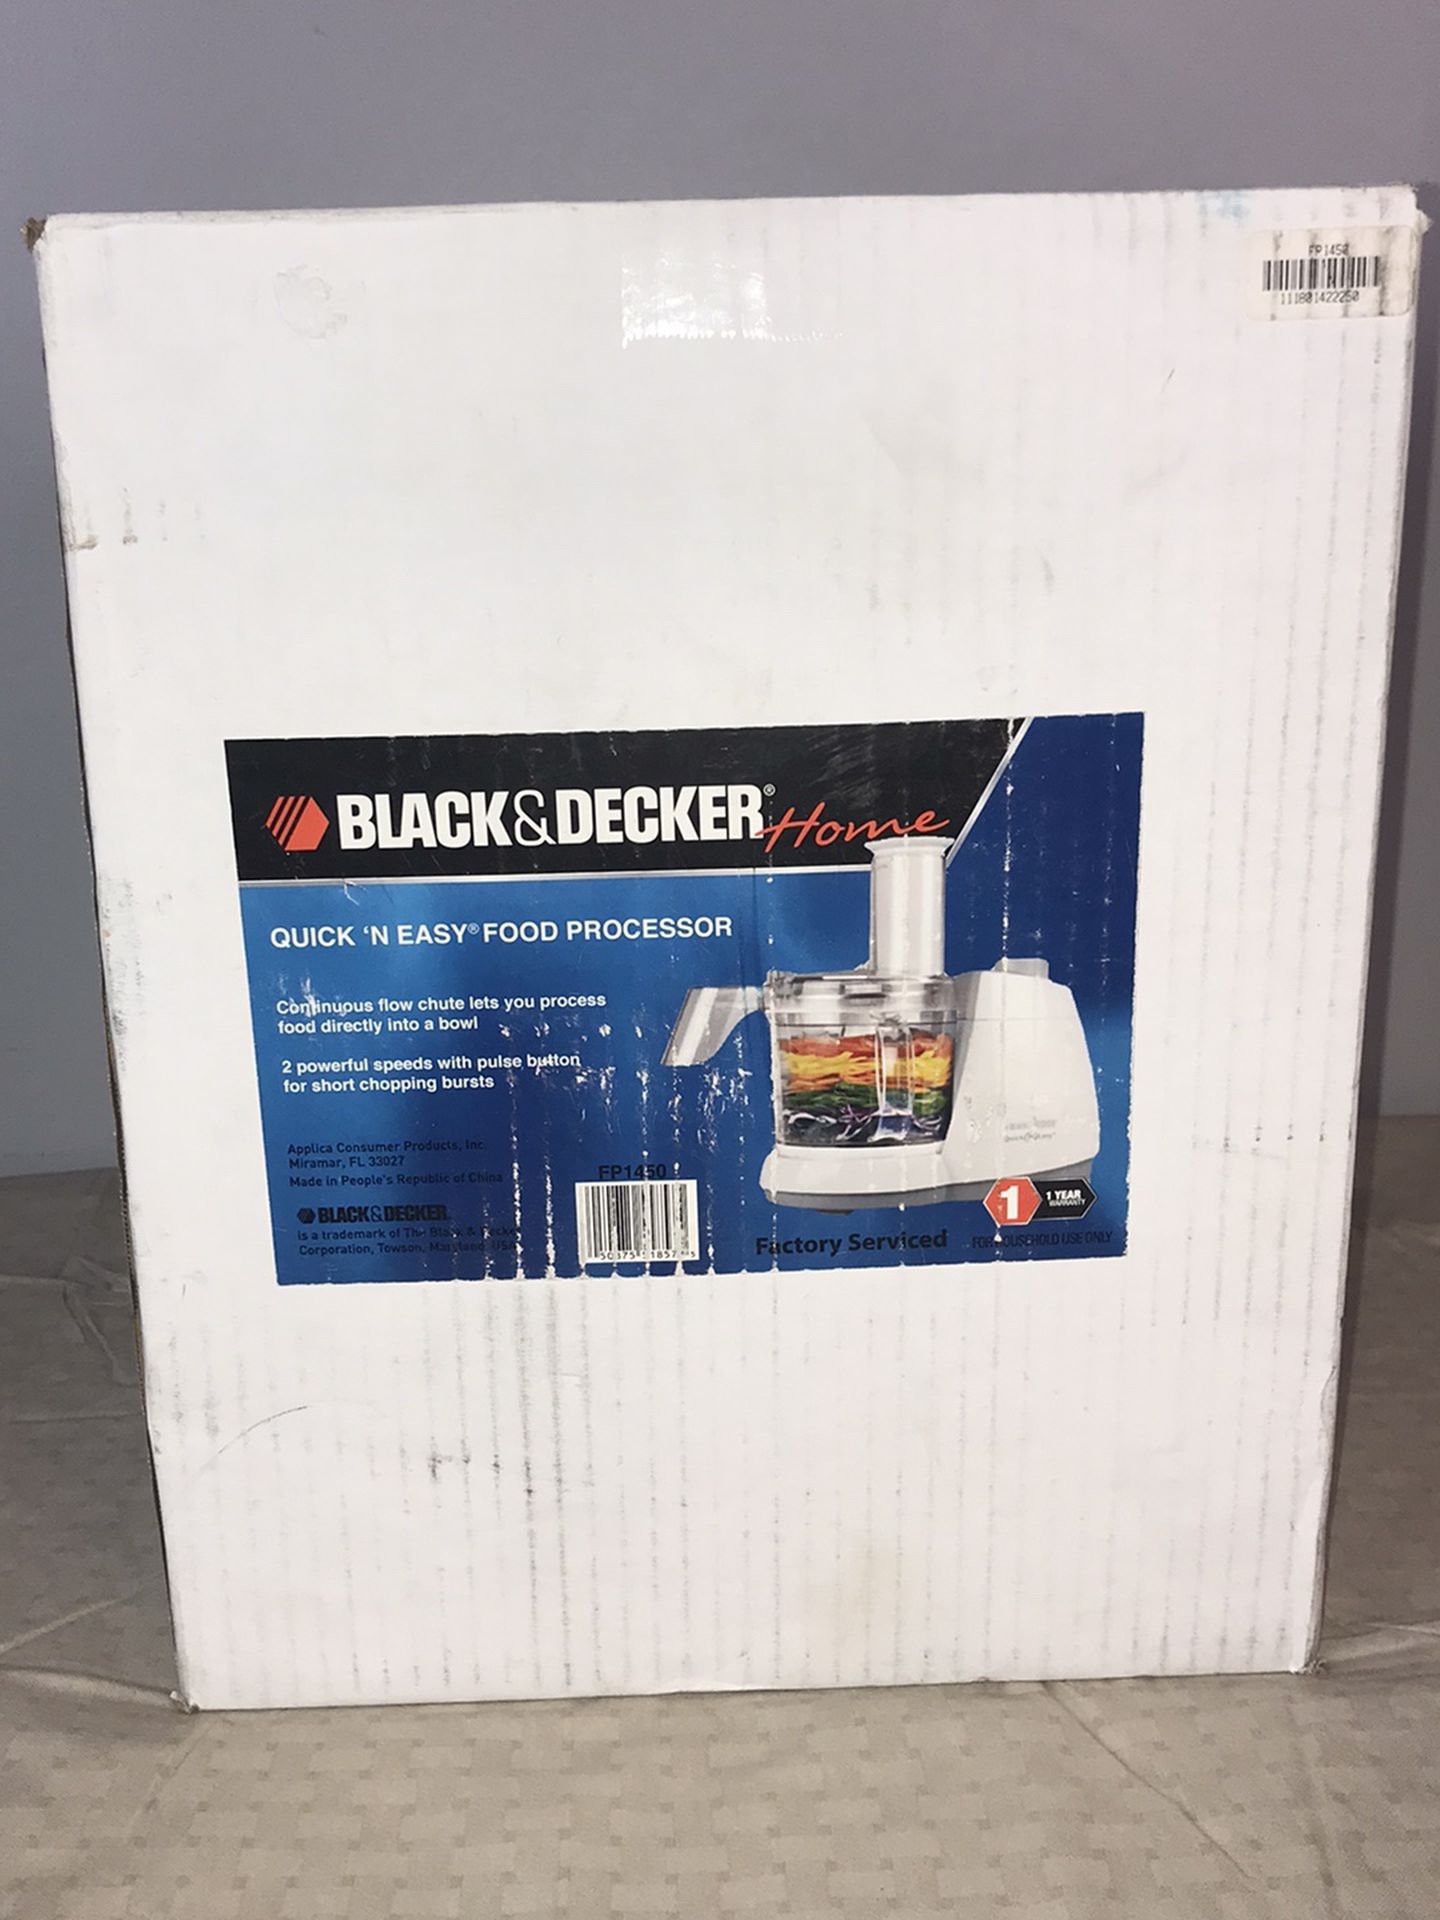 BLACK & DECKER QUICK & EASY FULL SIZE FOOD PROCESSOR, MODEL# FP1450 Pre-owned